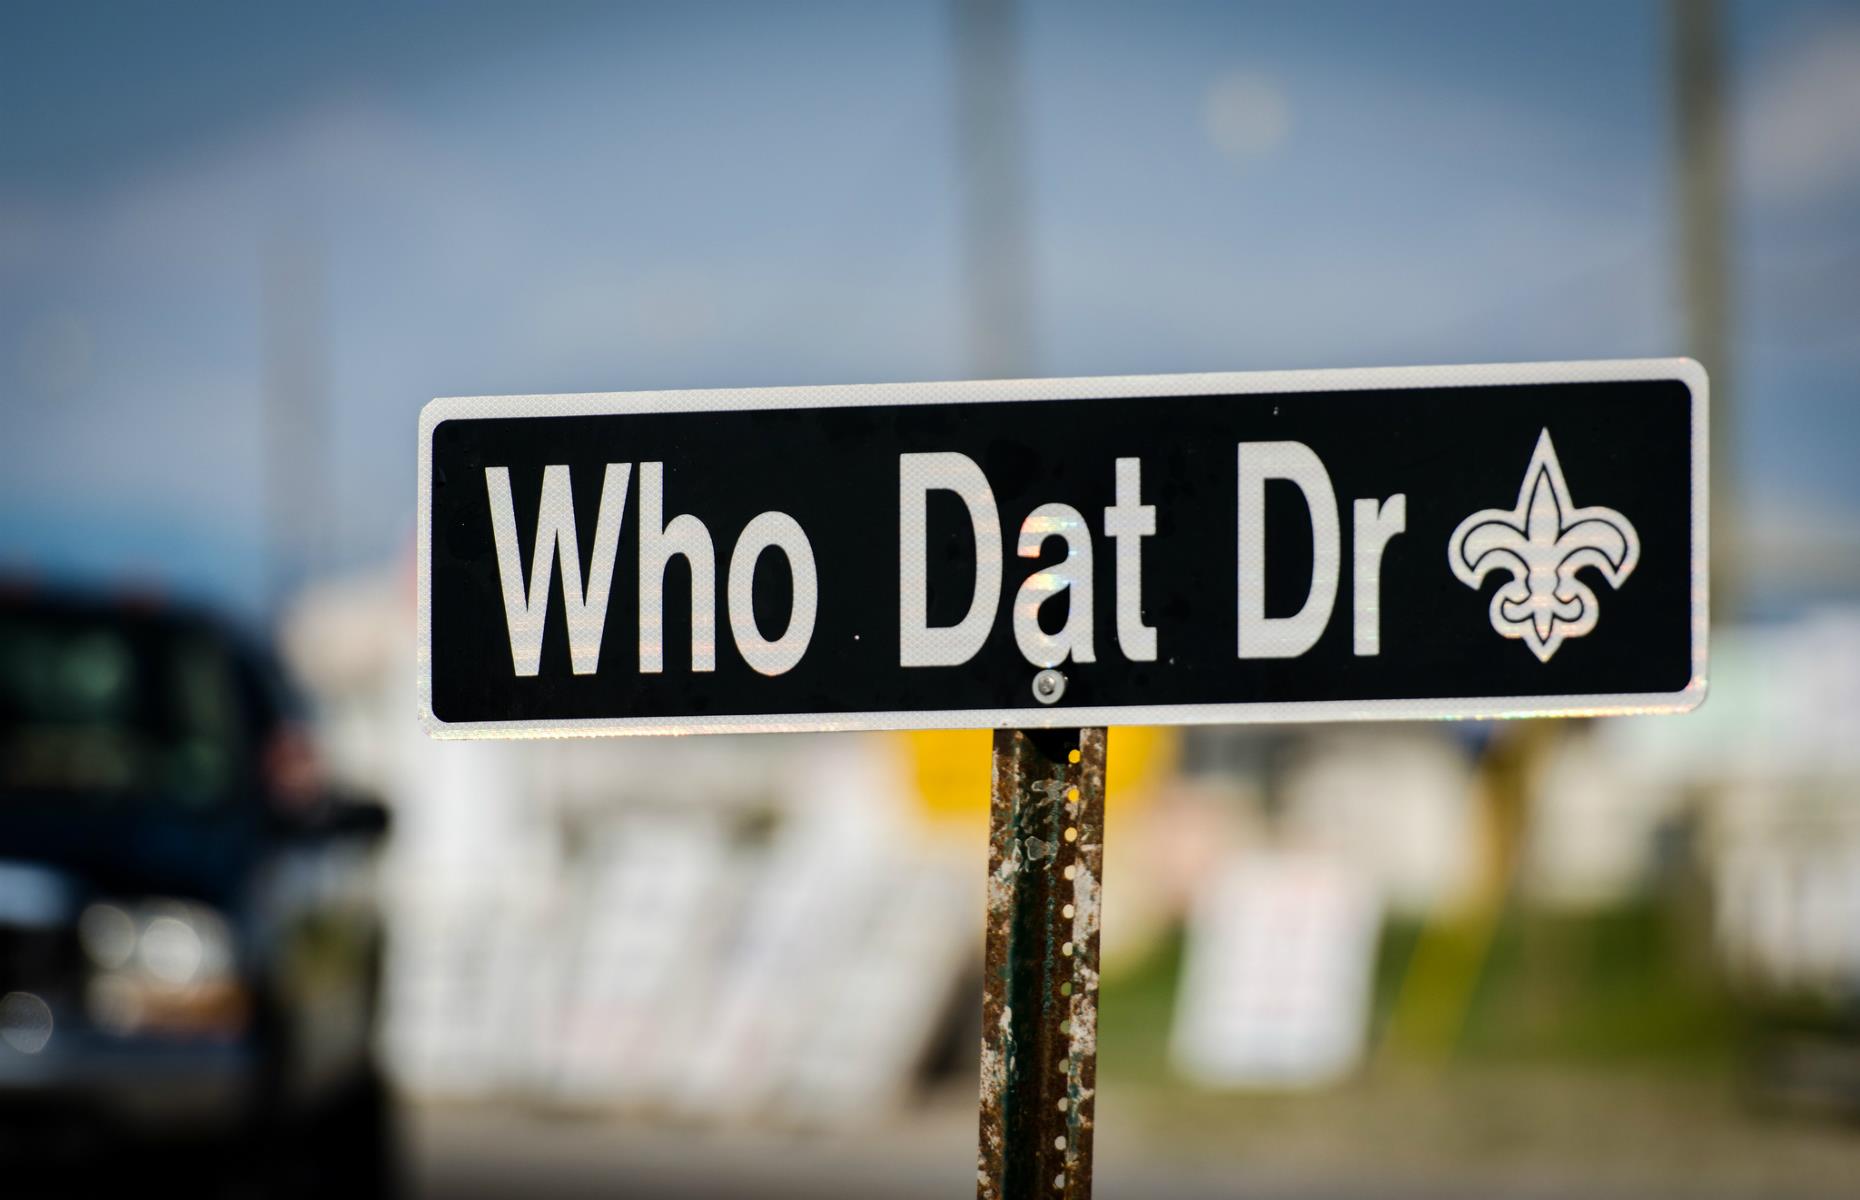 NFL's "Who Dat?" catchphrase